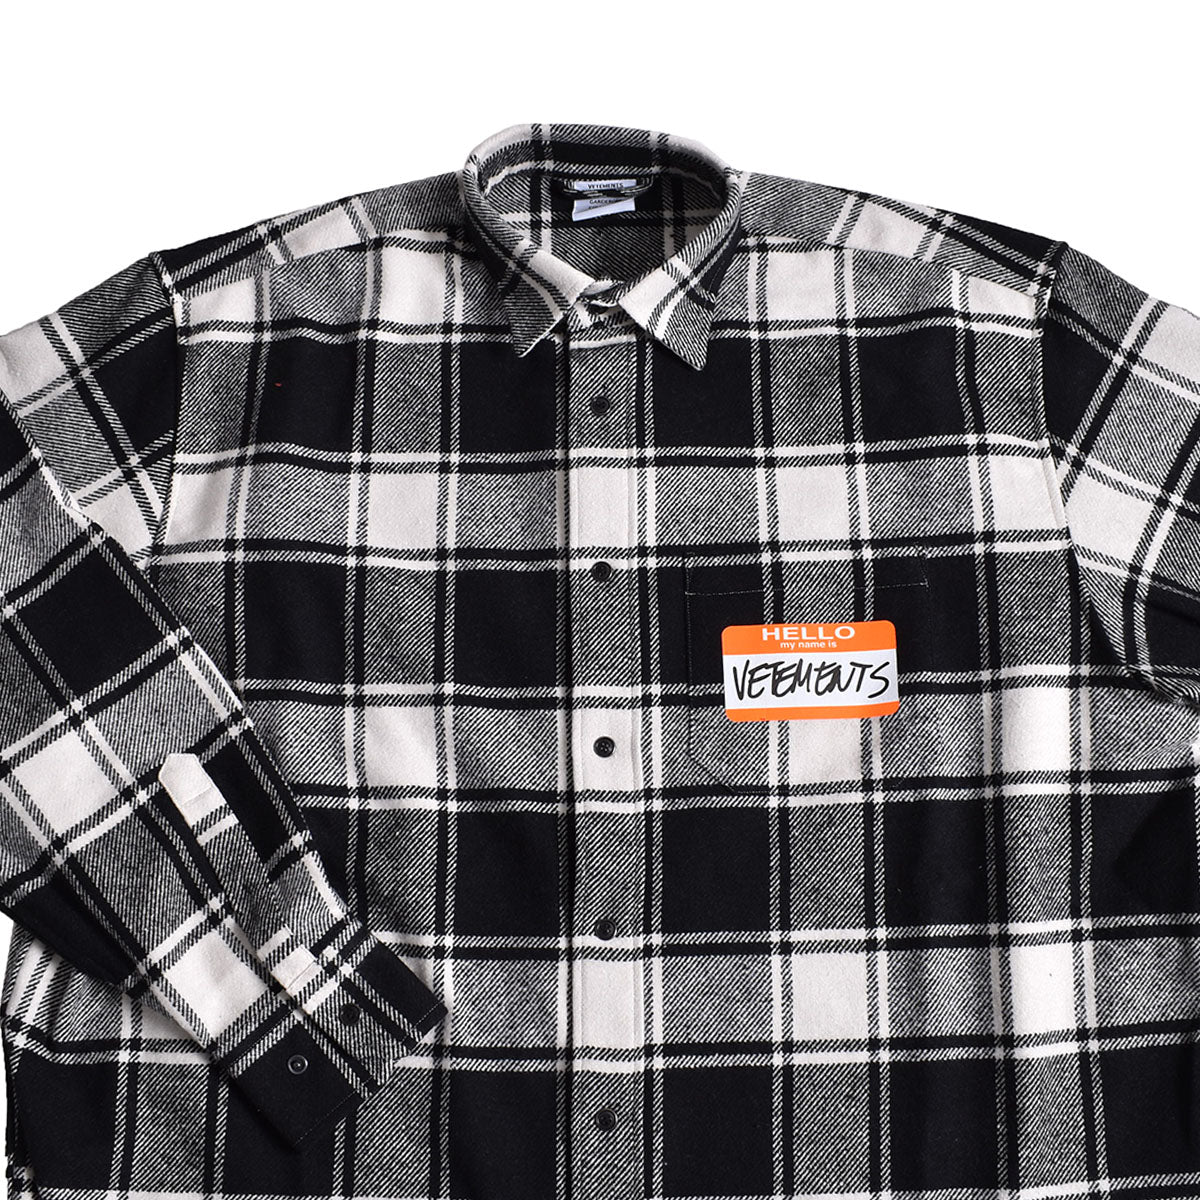 VETEMENTS]MY NAME IS VETEMENTS FLANNEL SHIRT/WHITE(UE54SH420) – R&Co.